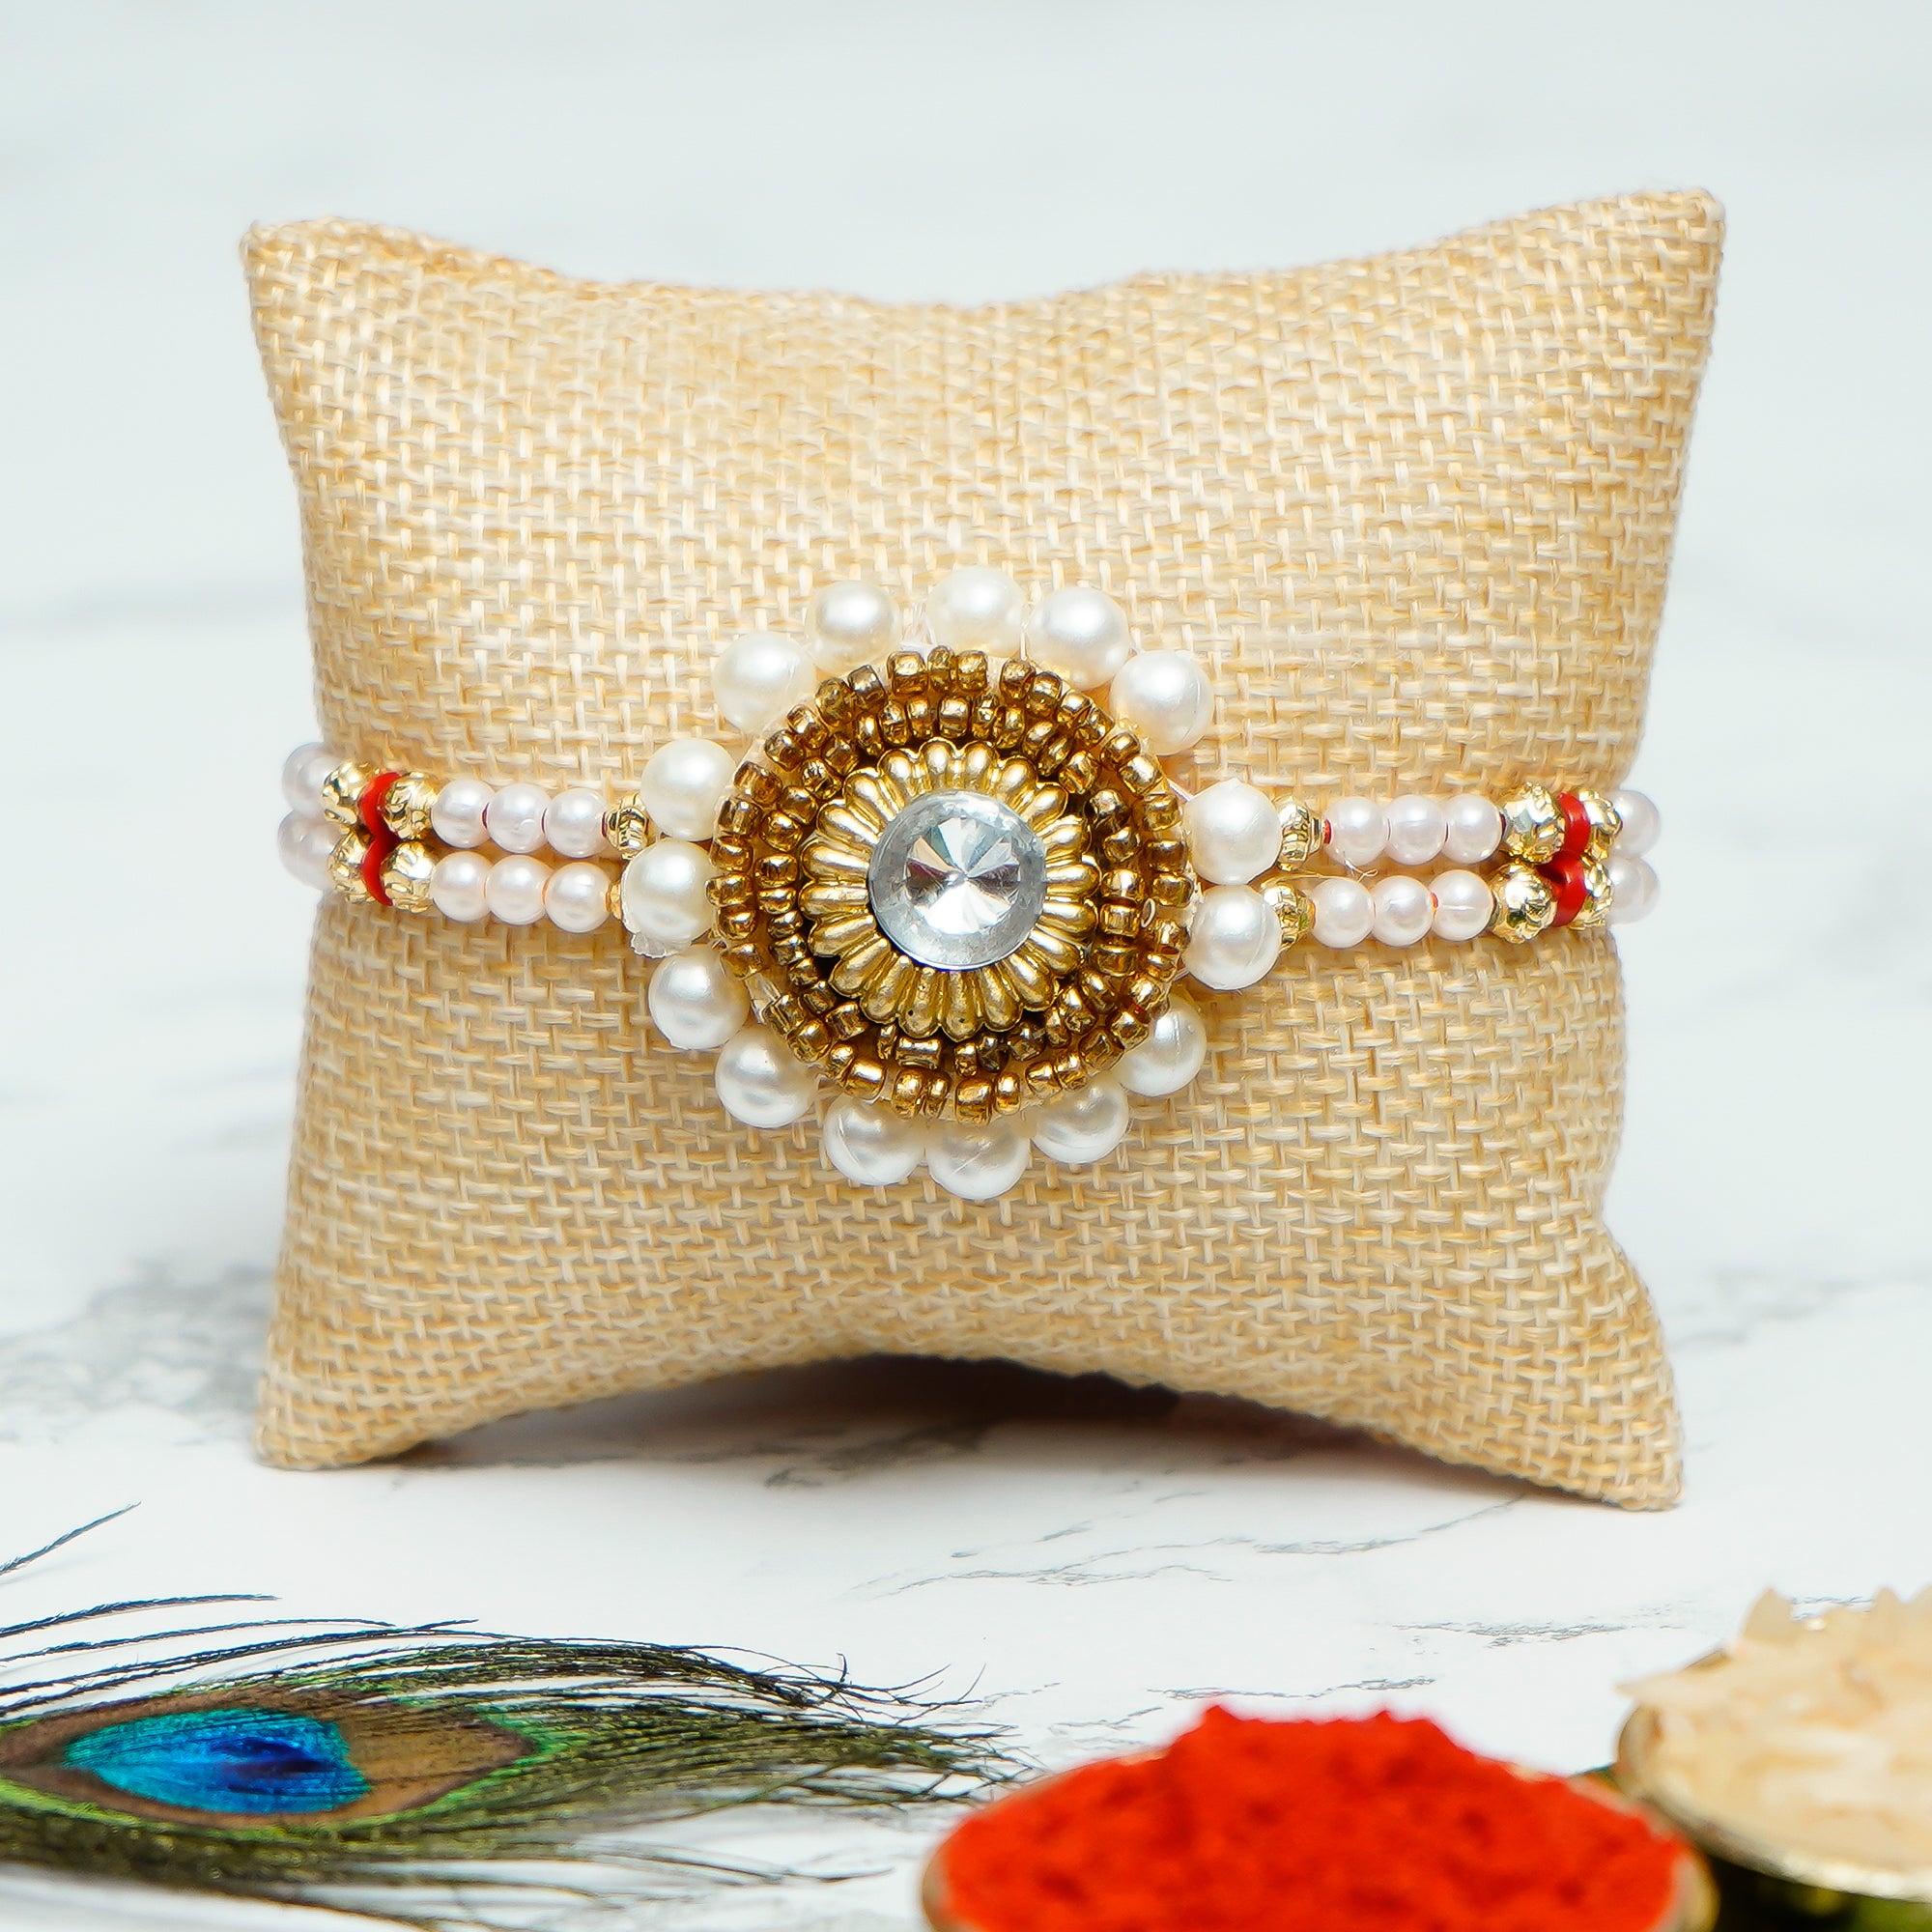 Designer Handcrafted Stone Pearl Rakhi with Antique Finish Decorative Brass Elephant Fingurine and Roli Chawal Pack, Best Wishes Greeting Card 1